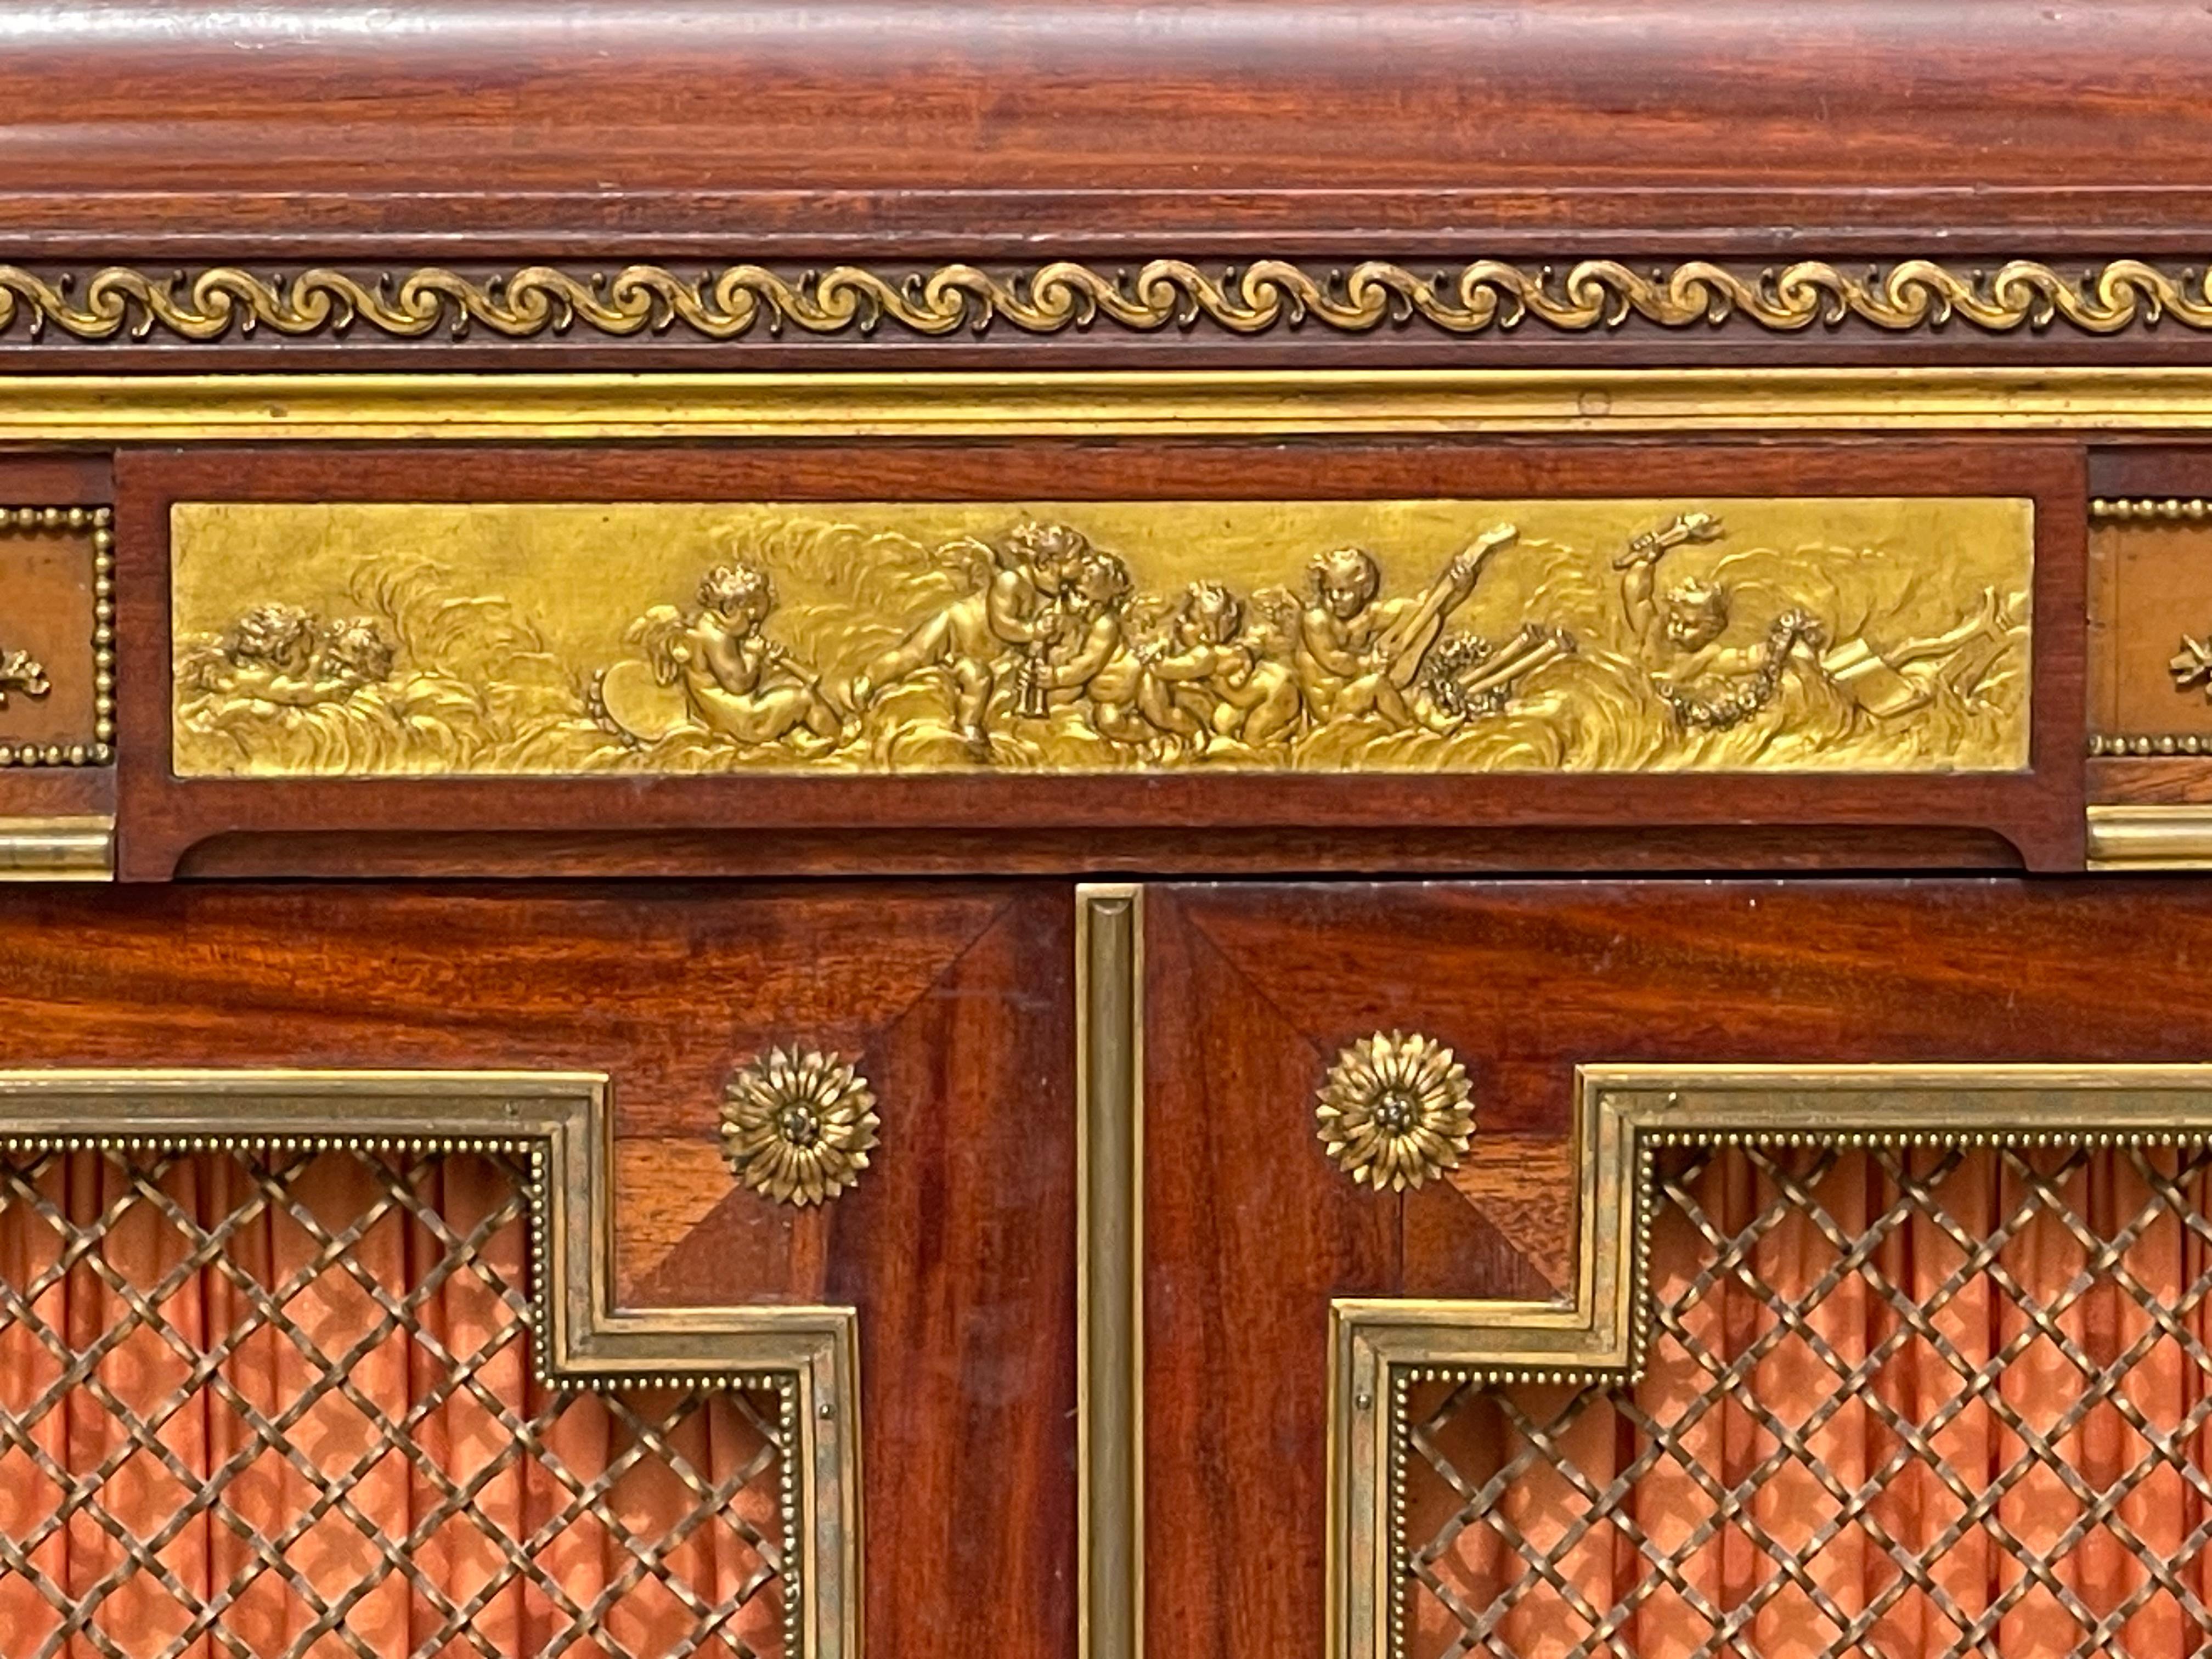 Mahogany and gilt bronze sideboard with two Louis XVI style mesh doors from the Napoleon III period with sea green marble top. The quality of the carving is remarkable on this piece of furniture. There are two shelves inside the cabinet. Furniture